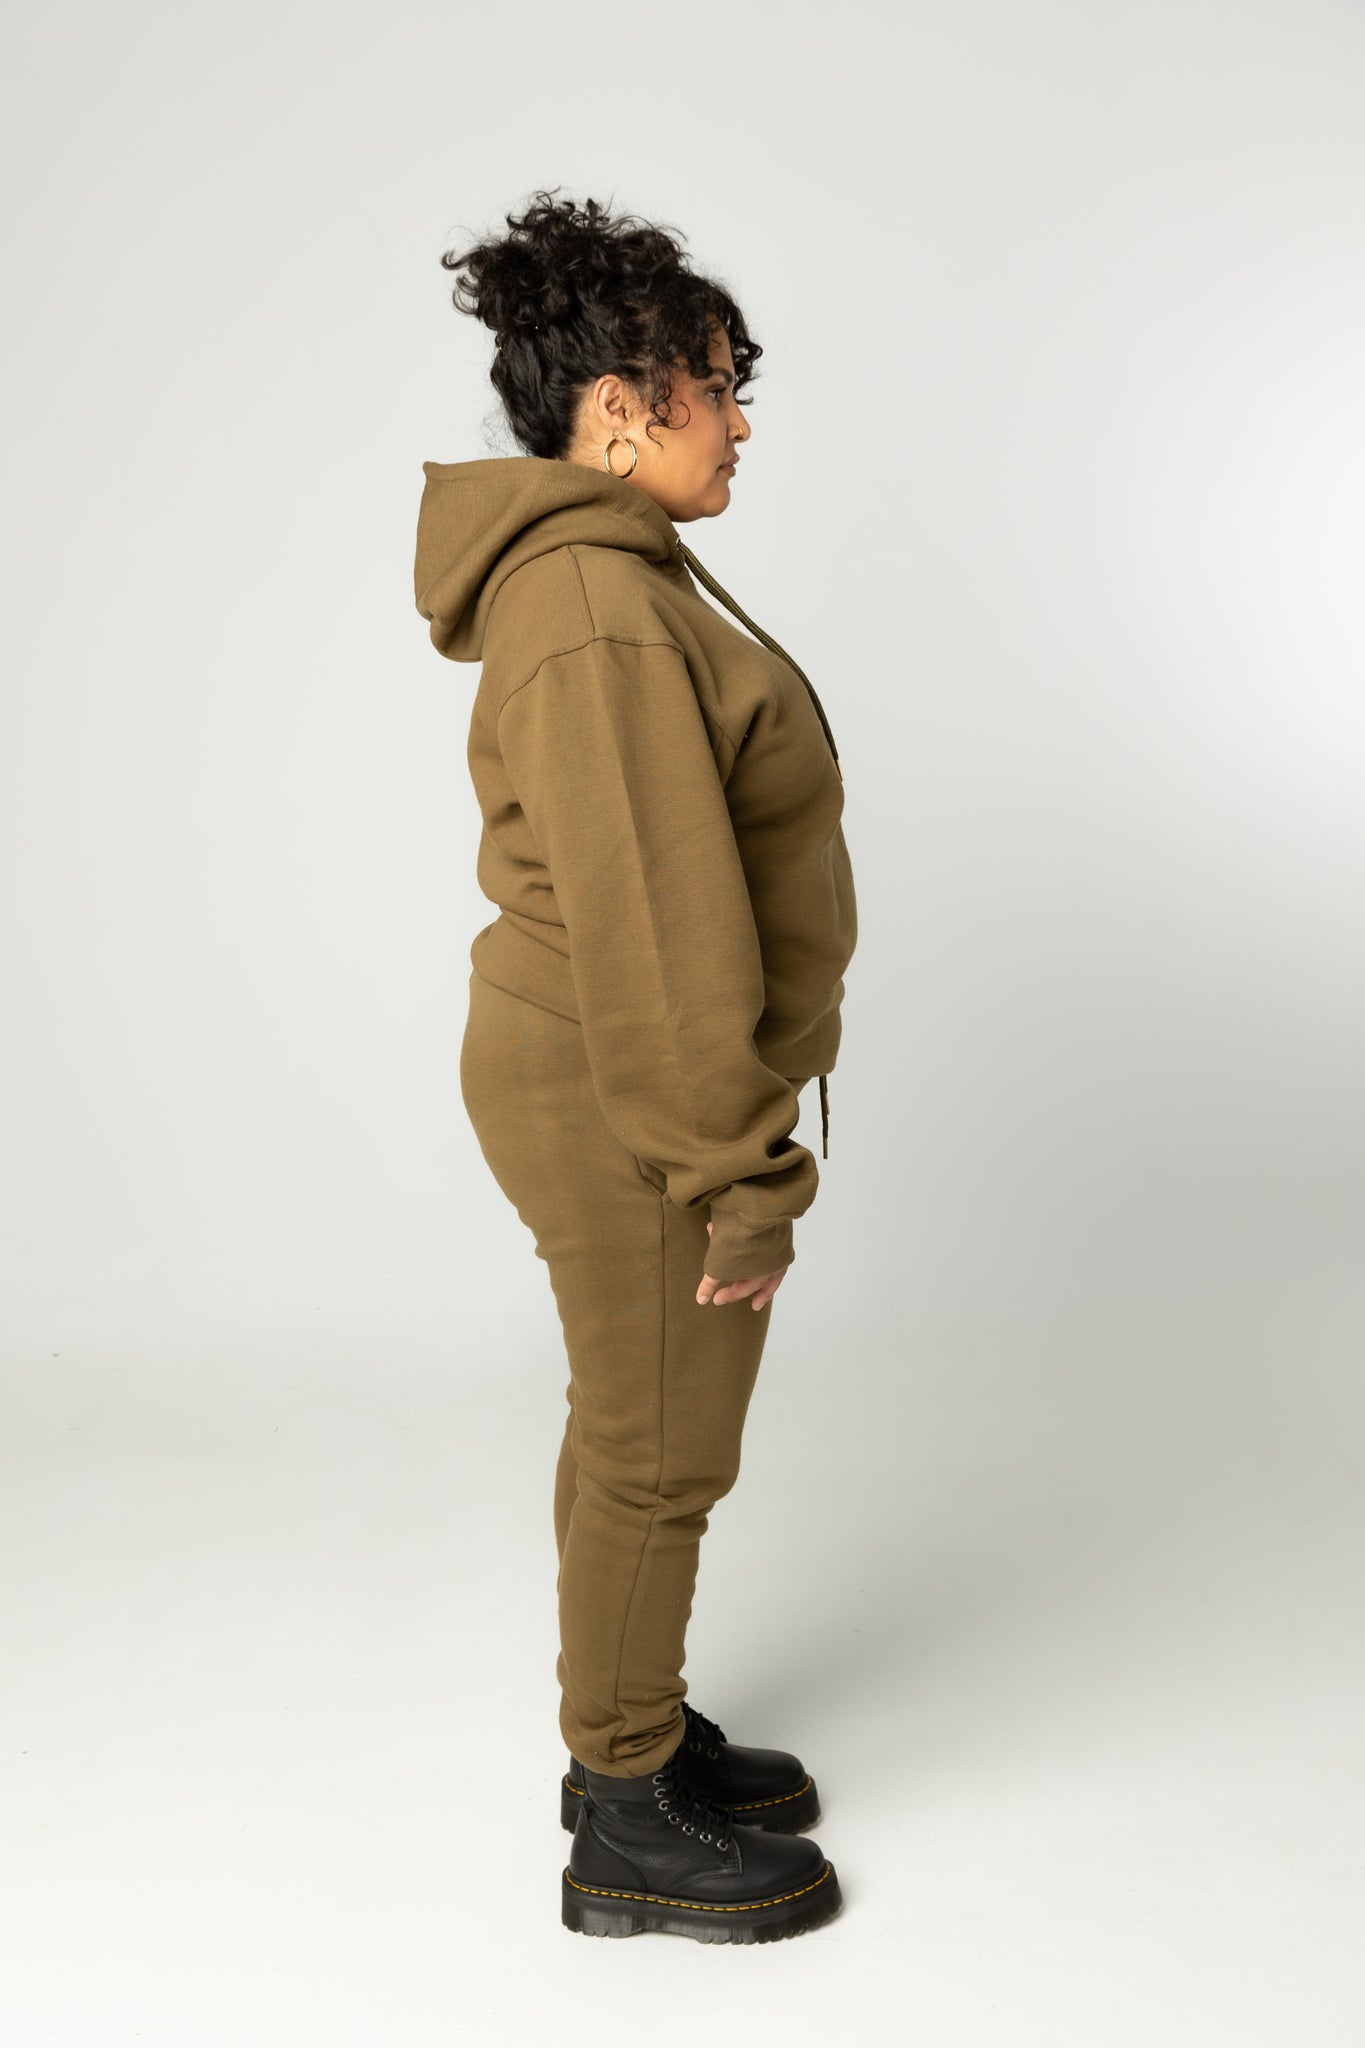 FORSALA - Army - Track suit